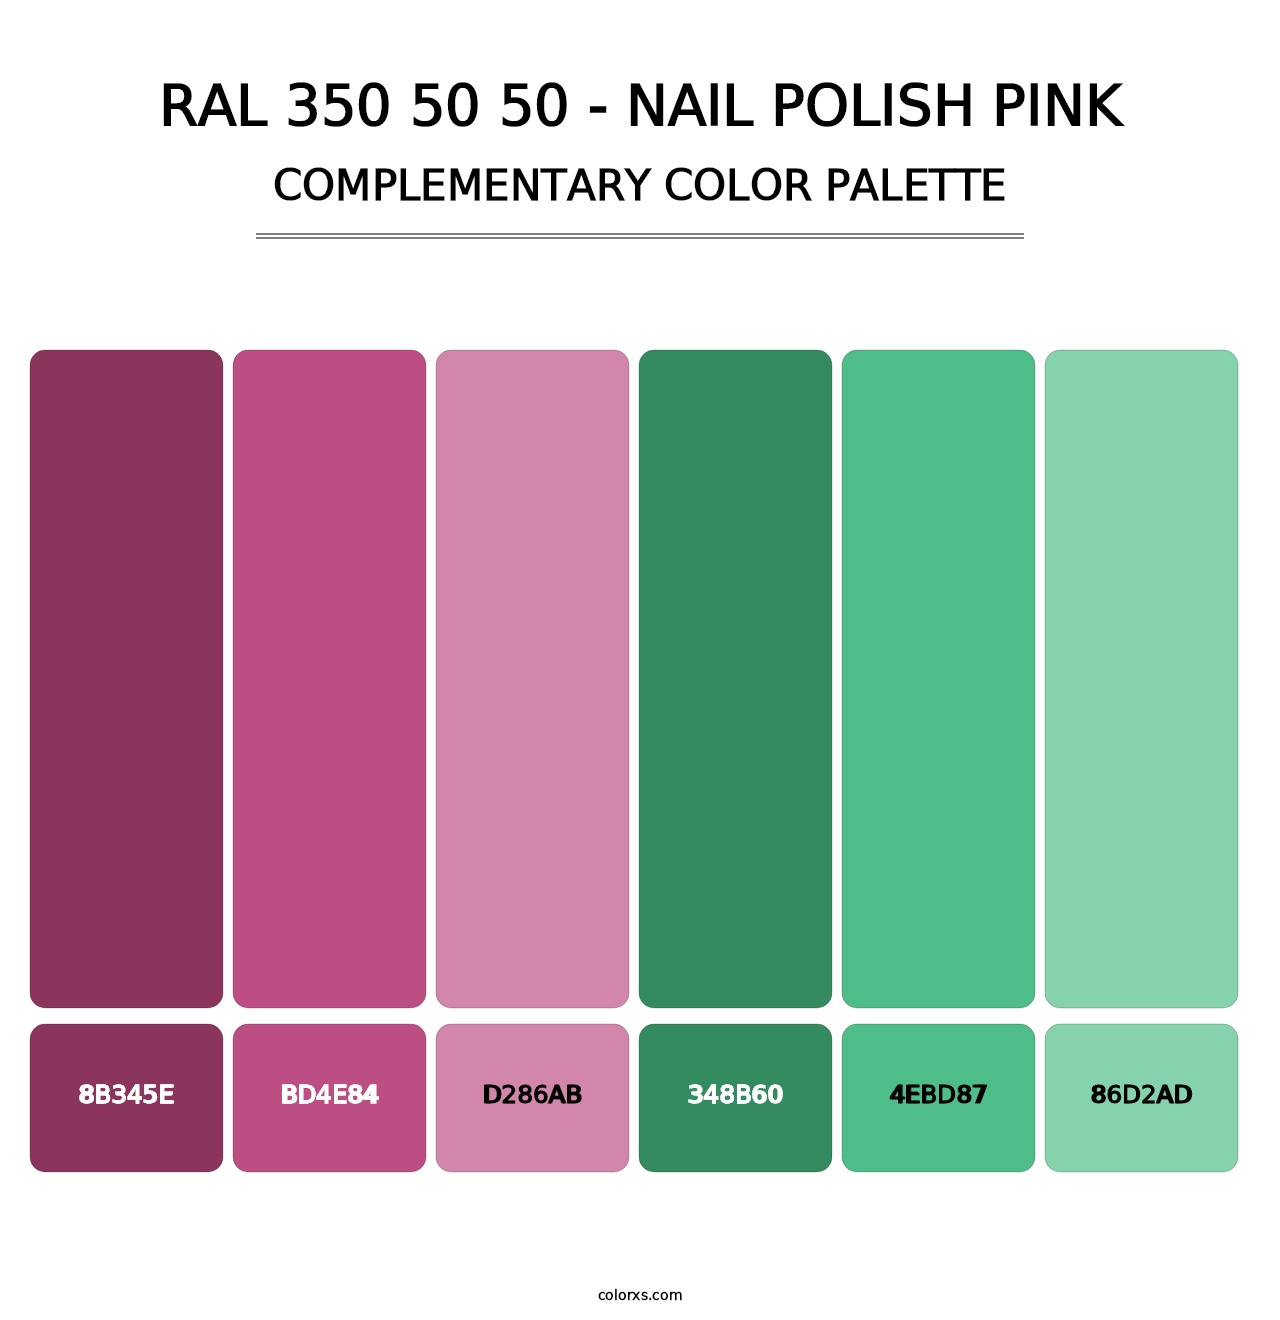 RAL 350 50 50 - Nail Polish Pink - Complementary Color Palette